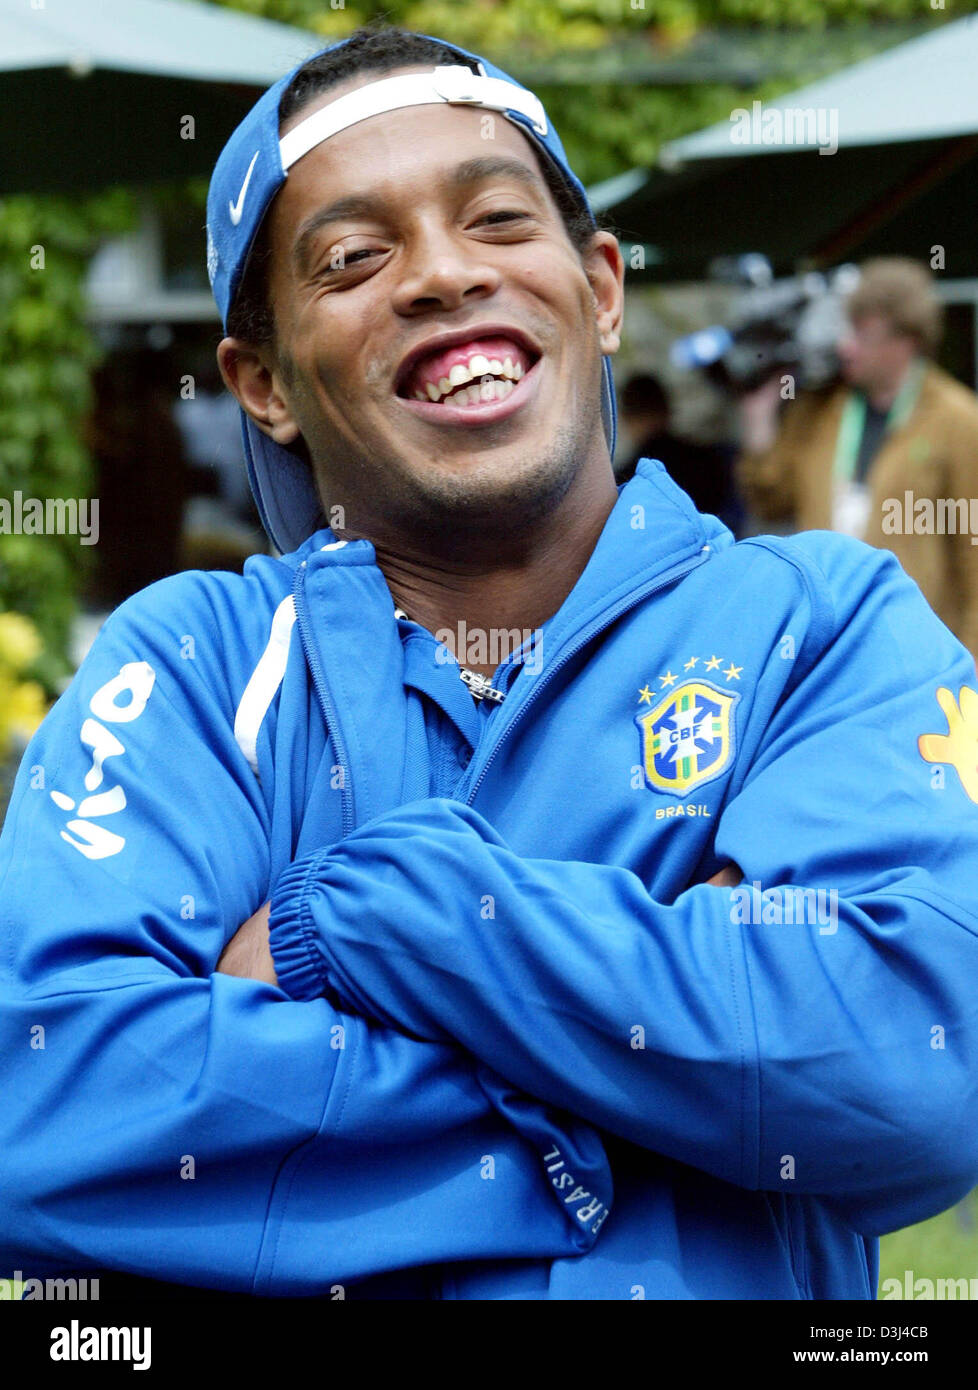 (dpa) - Brazilian star soccer player Ronaldinho smiles as he stands in front of the 'Schloss Lerbach' hotel, which accommodates the Brazilian national soccer team, in Bergisch Gladbach, Germany, Tuesday, 14 June 2005. The Brazilian team prepares for their first match of the 2005 Confederations Cup. Stock Photo